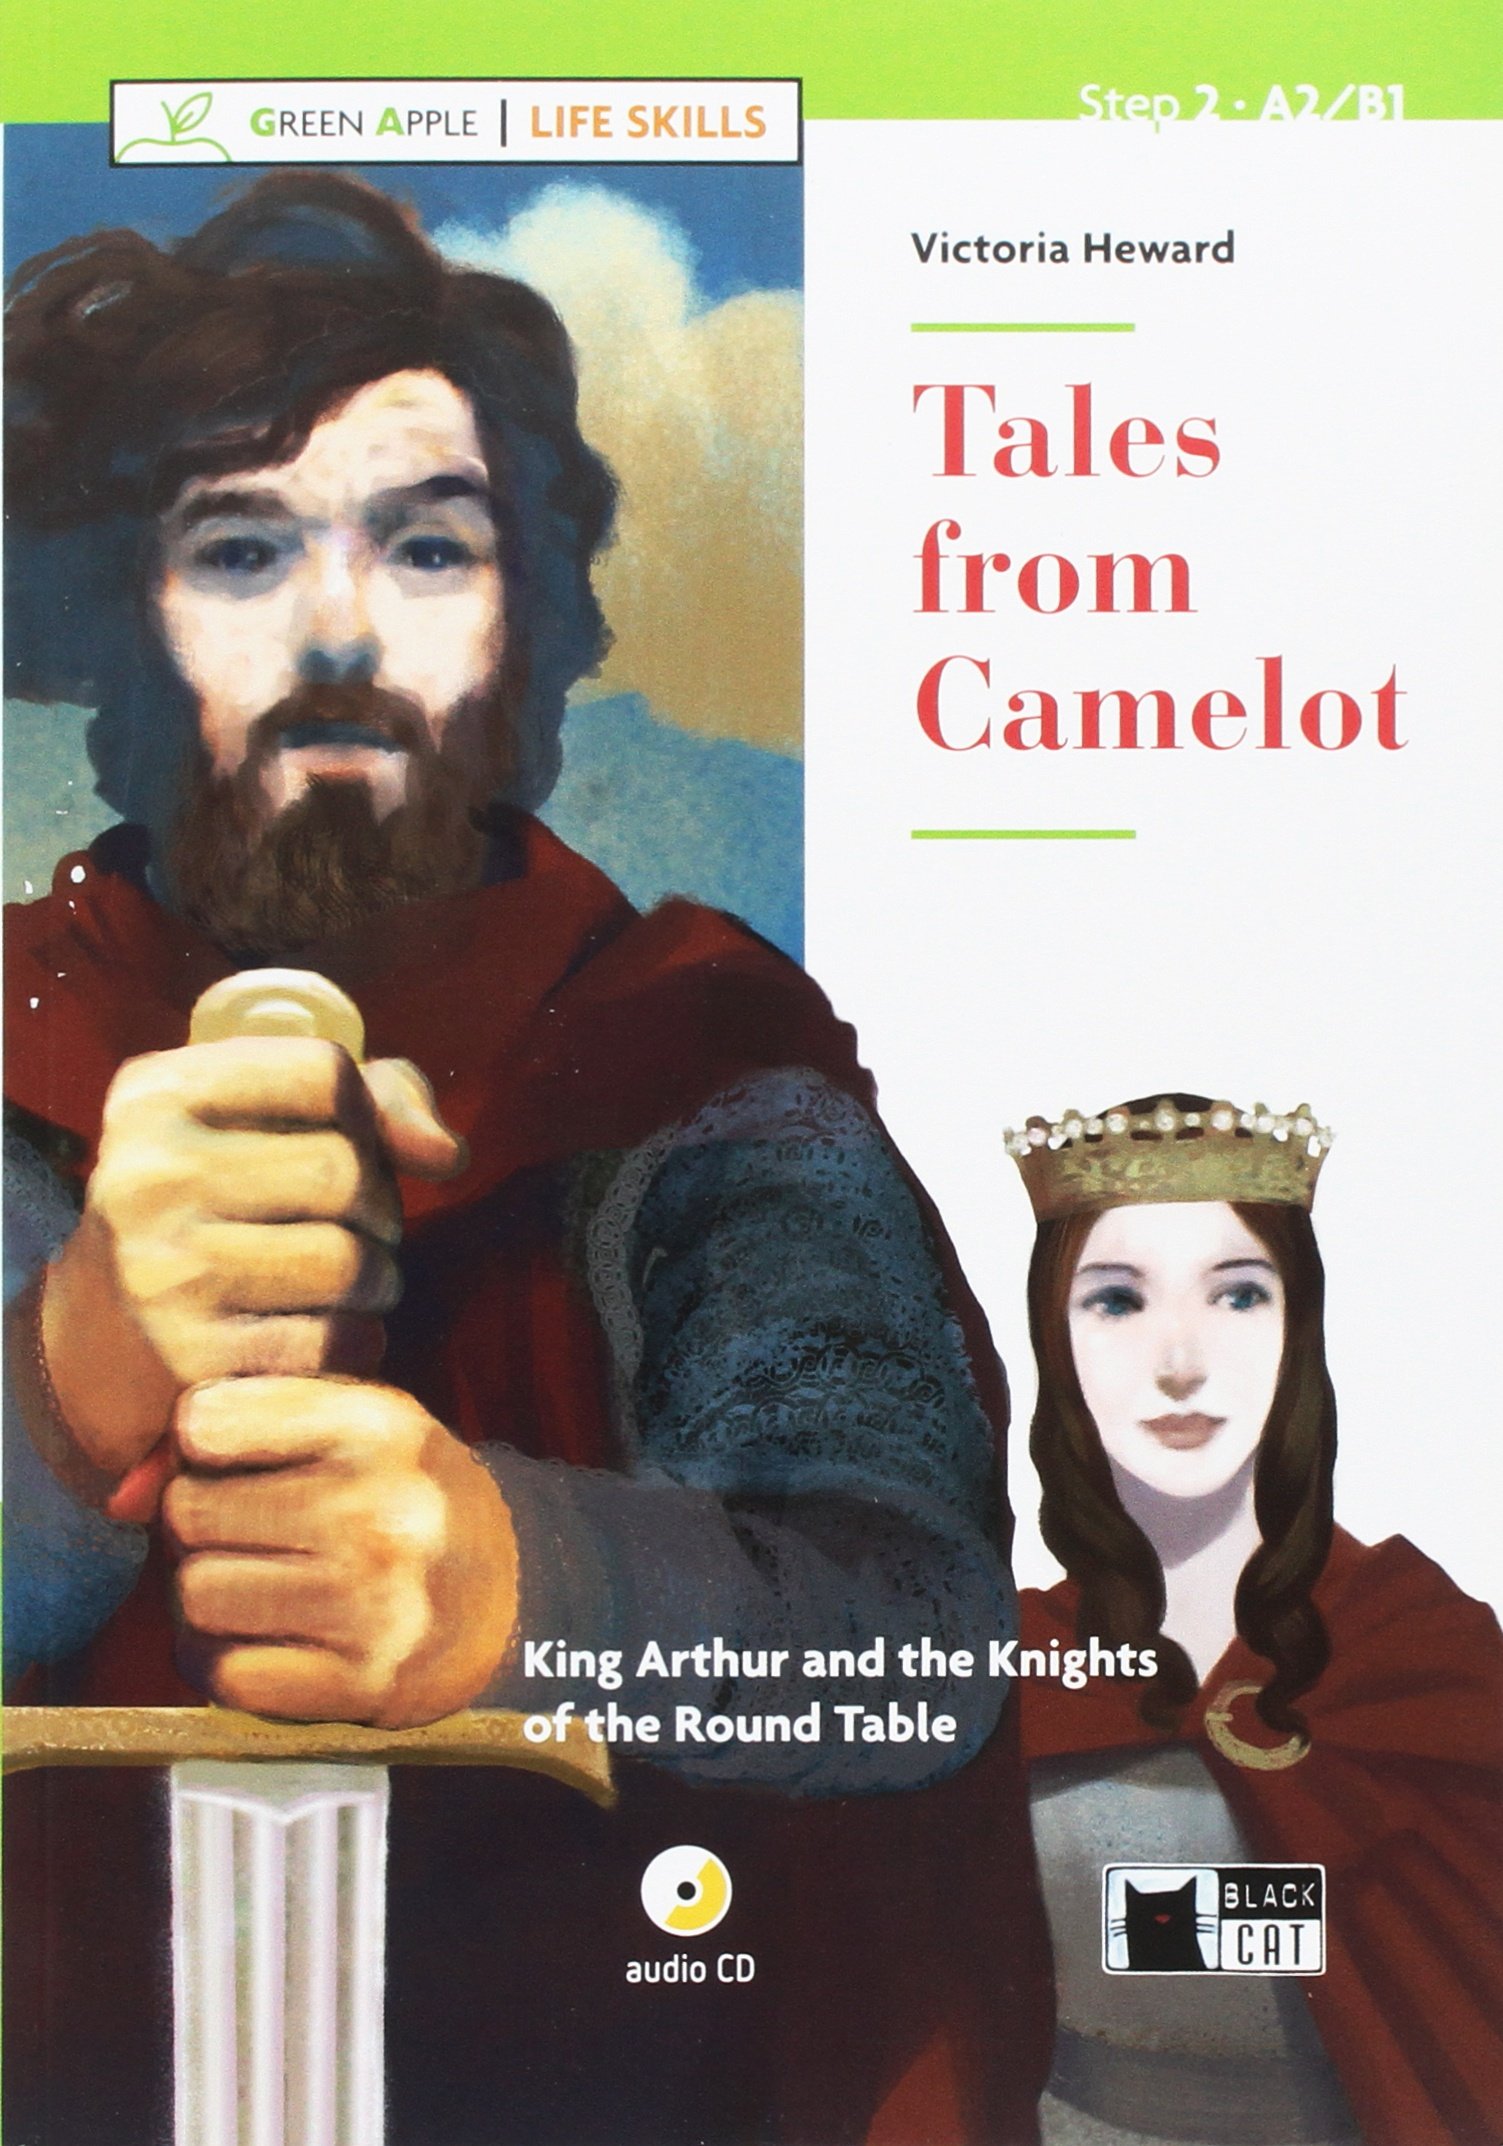 Green Apple - Life Skills: Tales from Camelot + CD